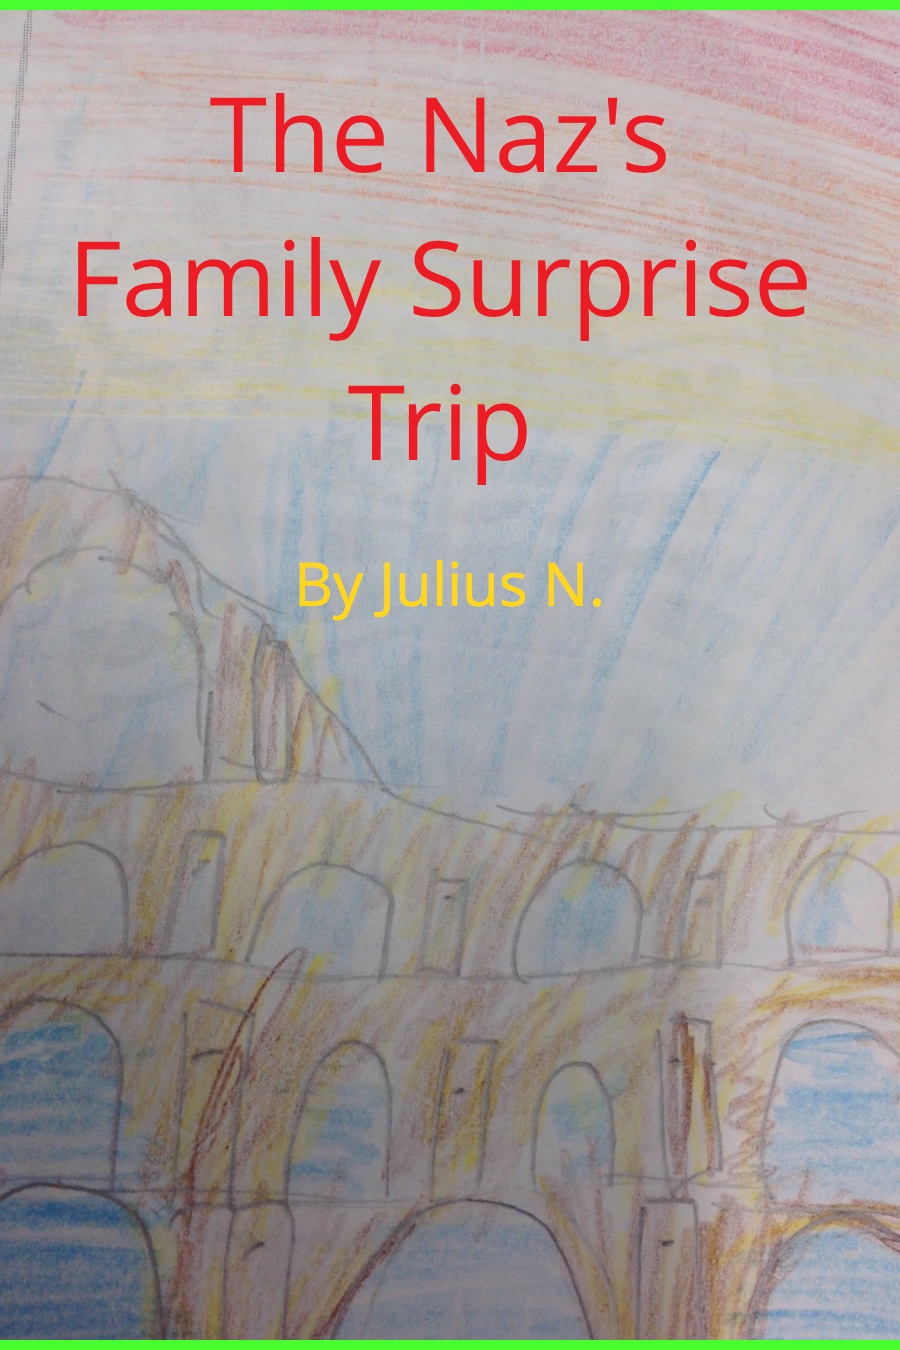 The Nazareth Family Trip to Rome by Julius N